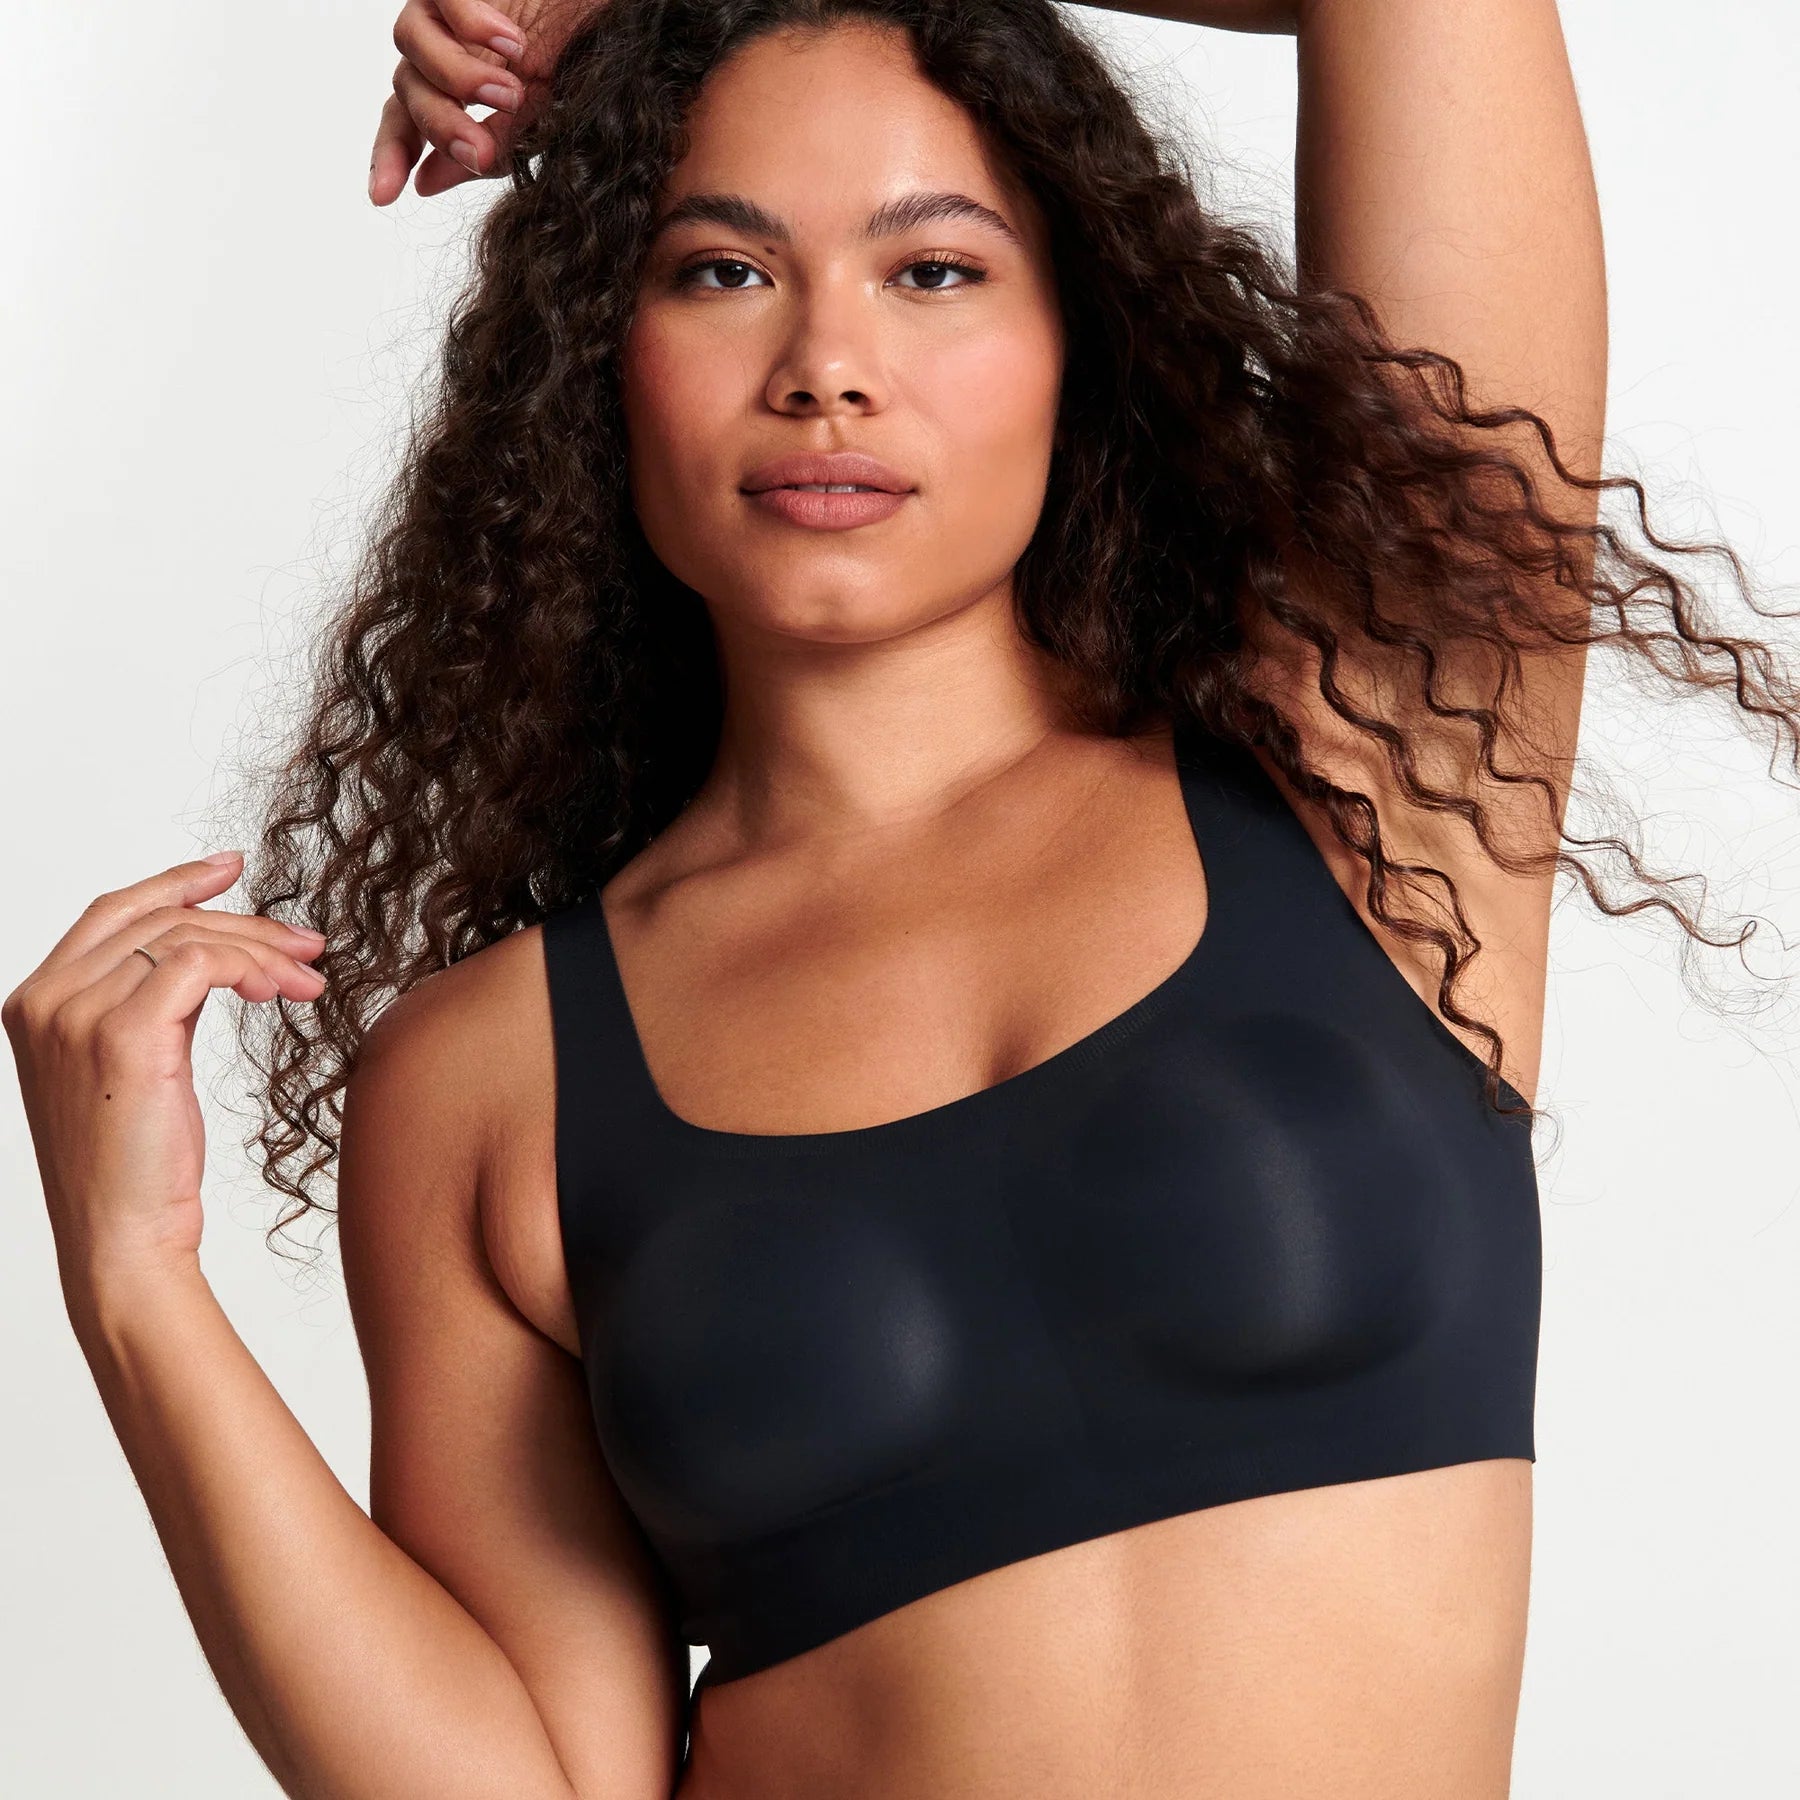 Evelyn & Bobbie Wire Free Beyond Bra (More colors available